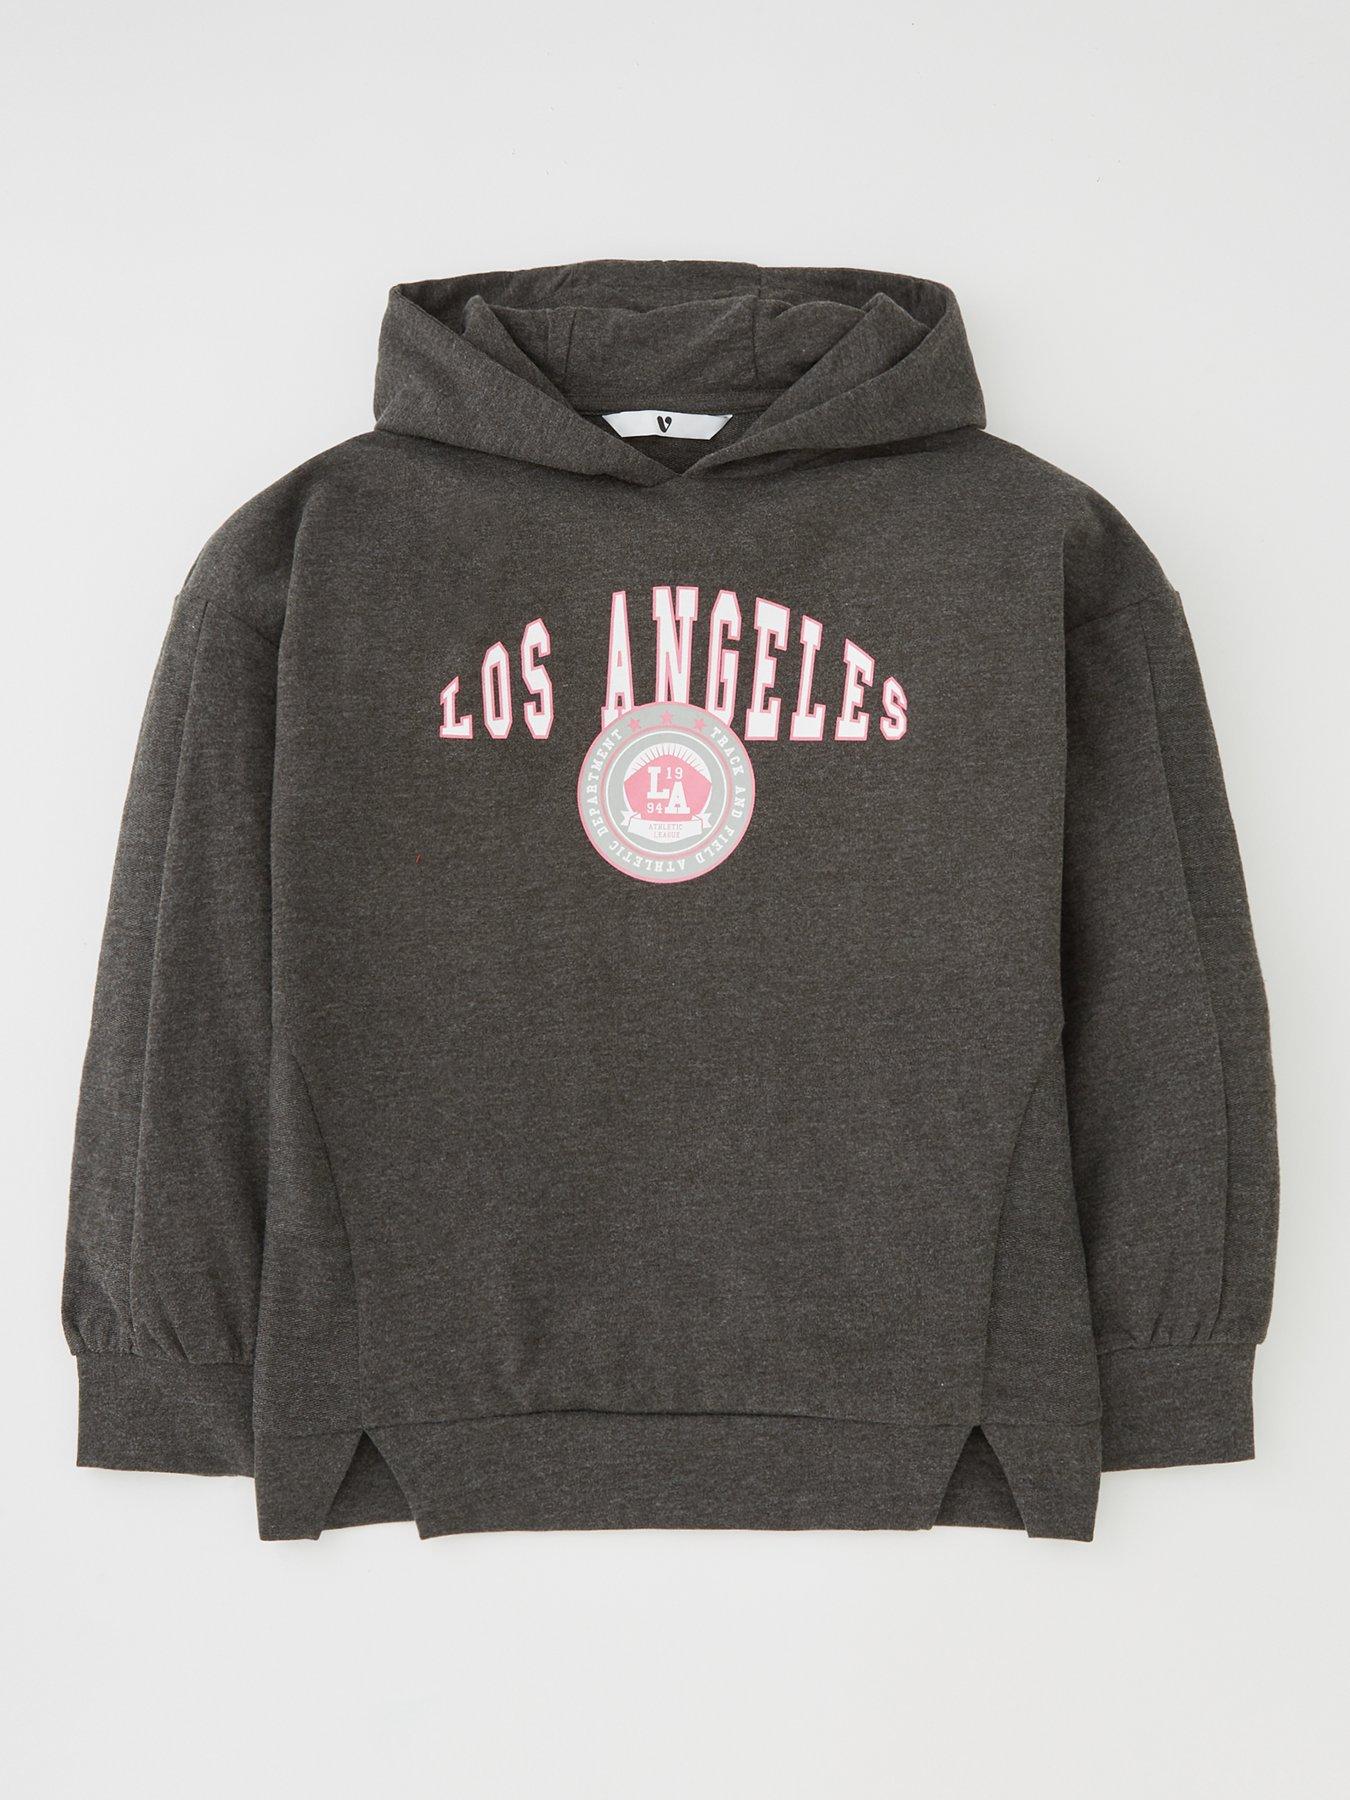 VS PINK DETROIT TIGERS SLOUCHY HOODIE  Uploaded with Pinterest